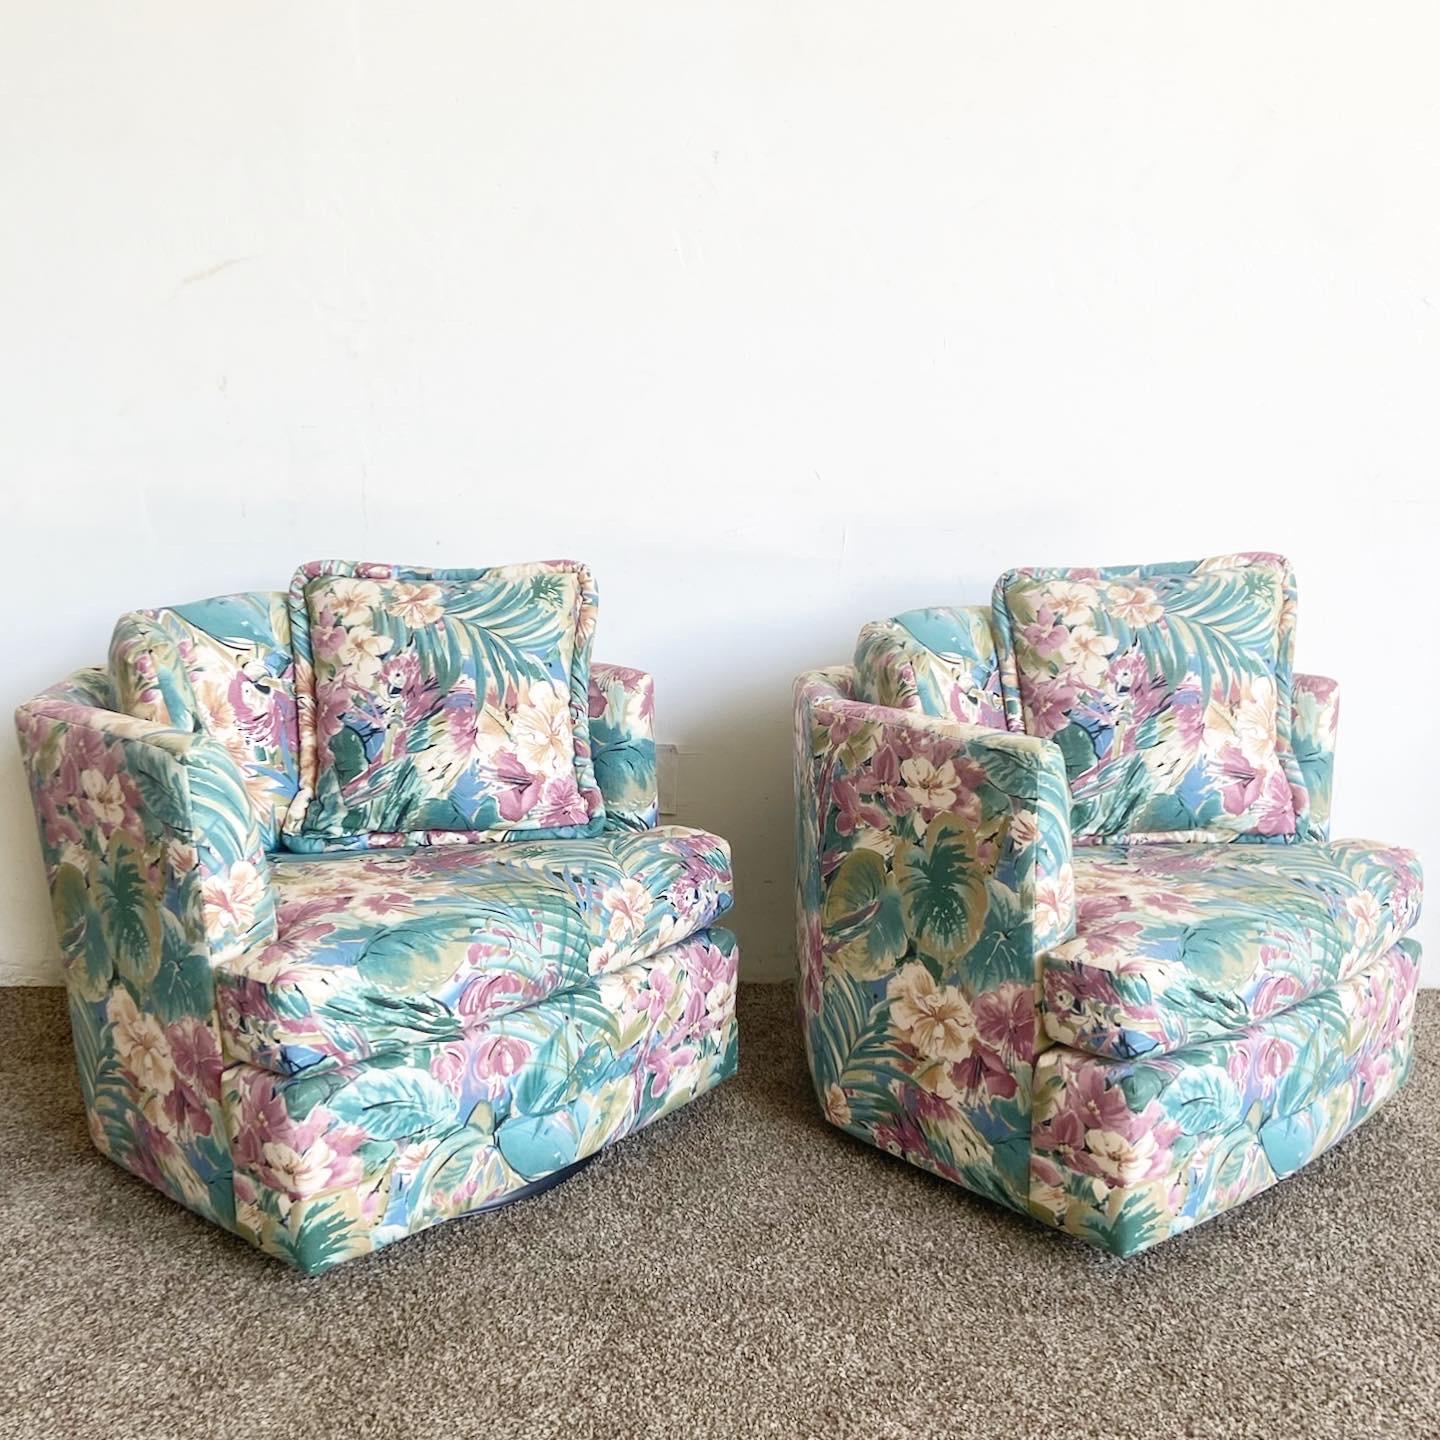 Post-Modern Postmodern Parrot and Foliage Swivel Chairs - a Pair For Sale